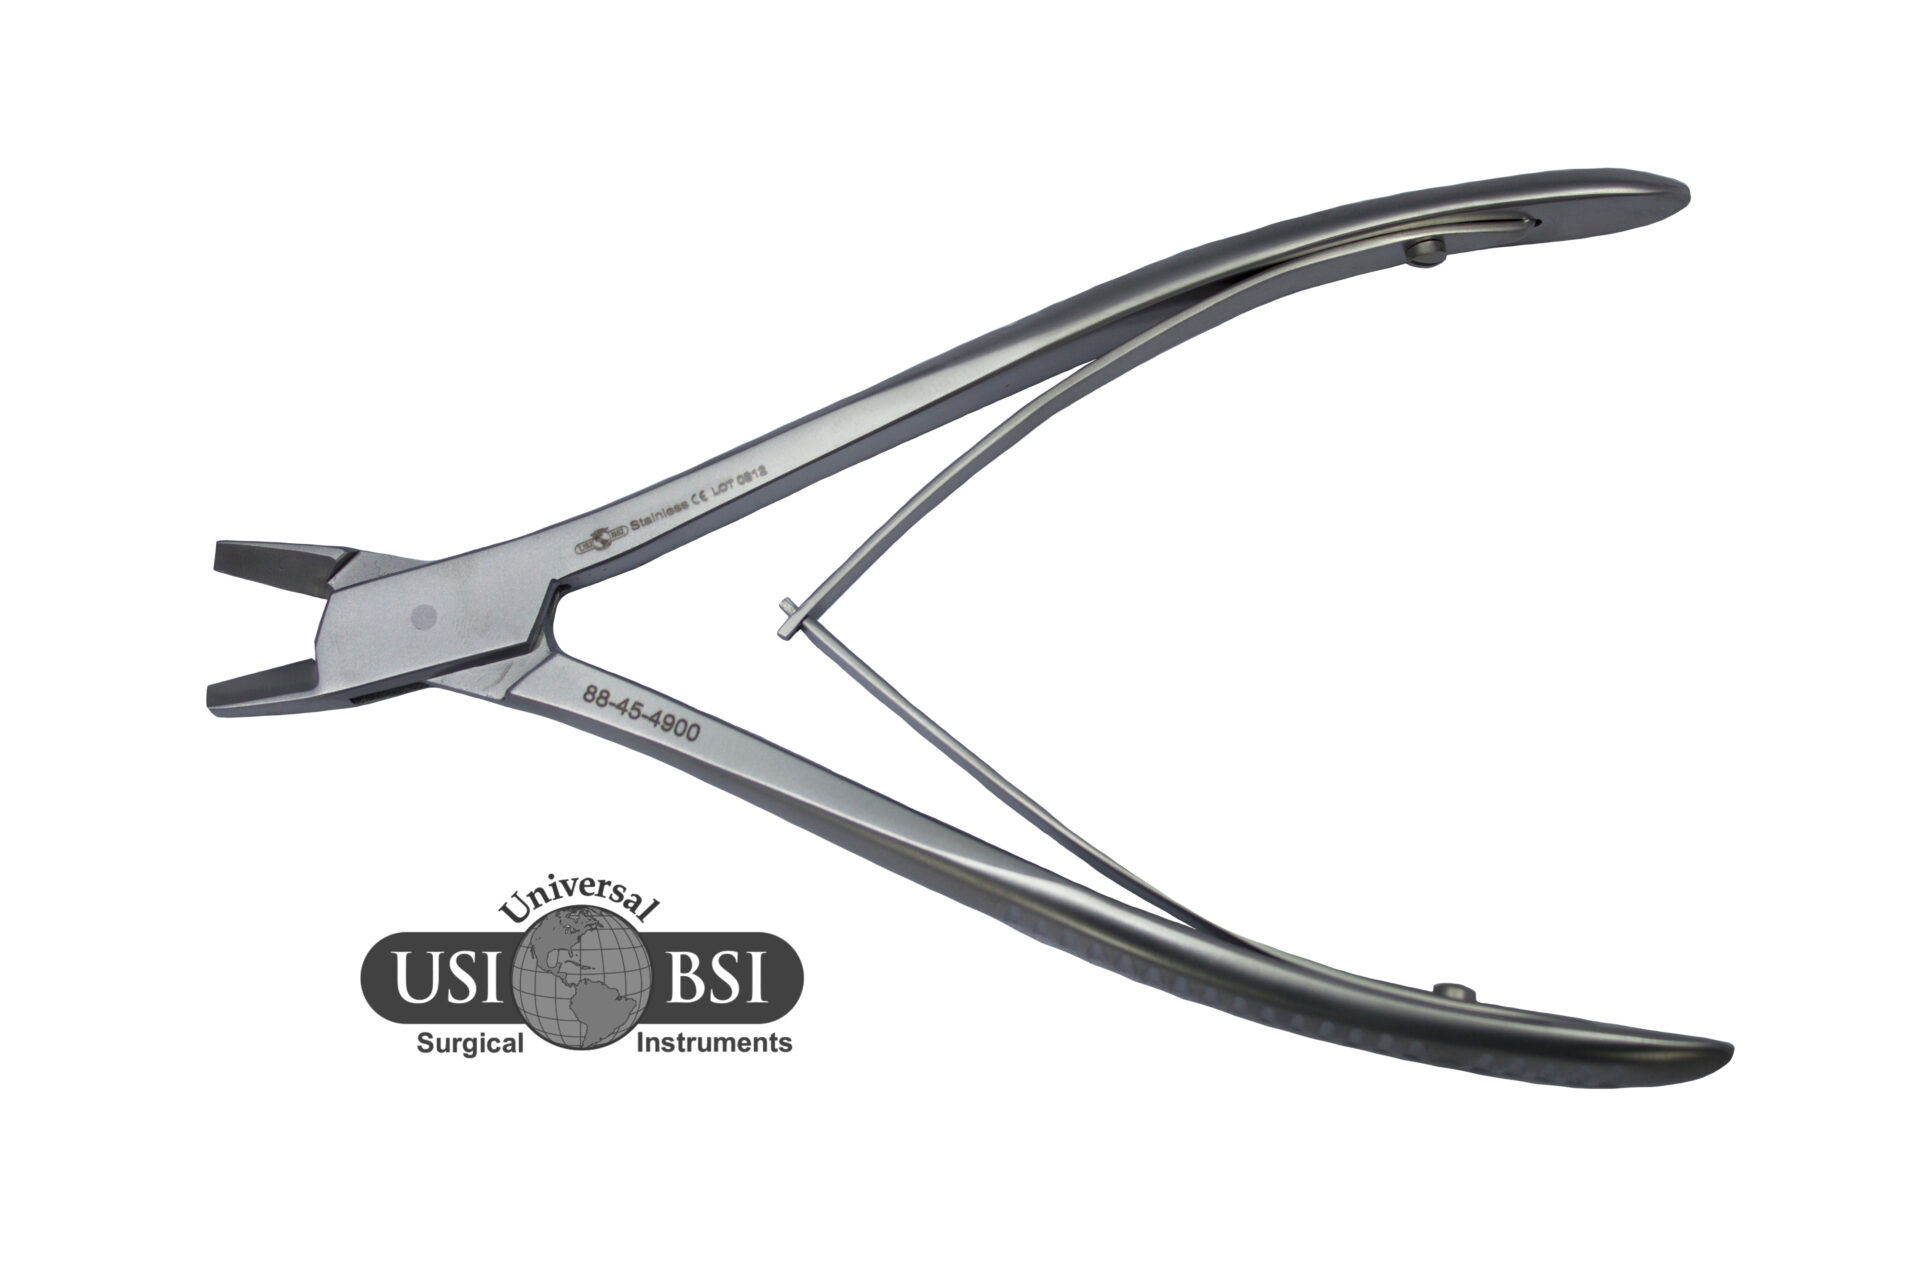 A pair of scissors with the usa / bsi logo on it.